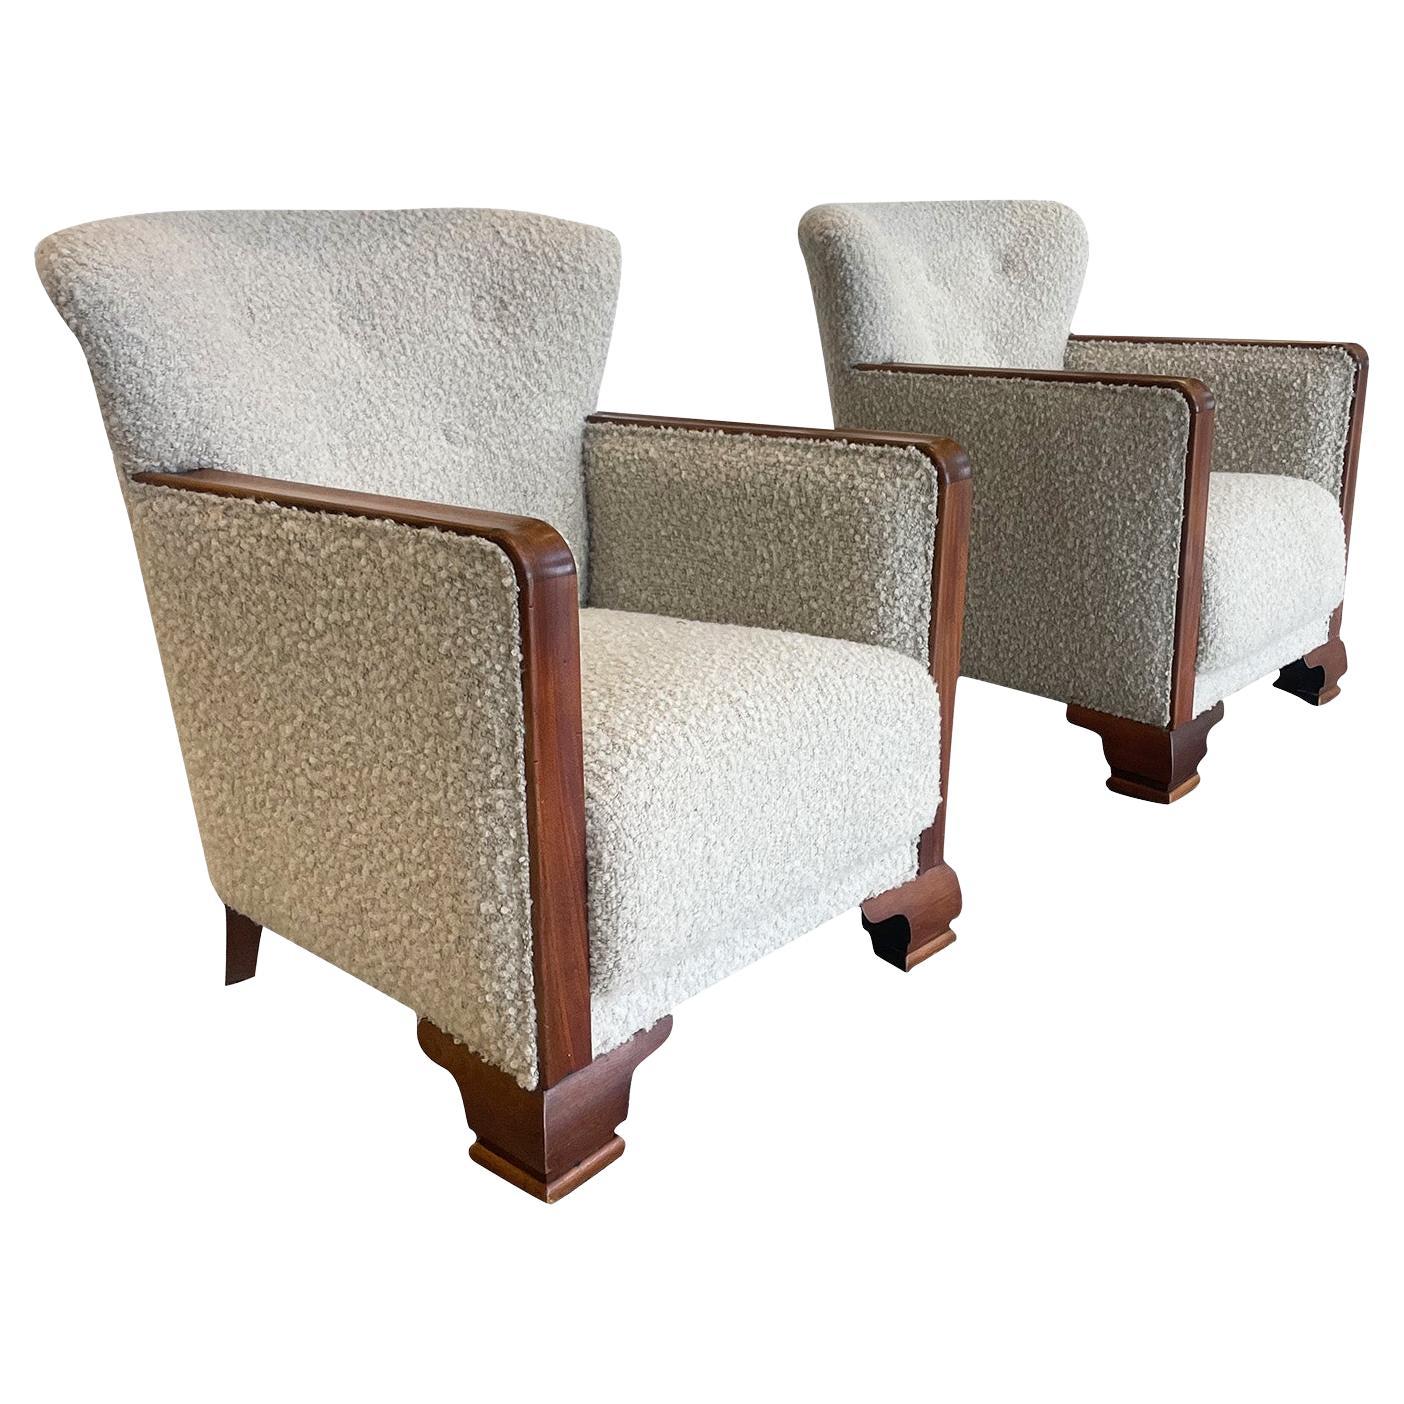 Pair of 1950s Danish Art Deco Club Chairs After Fritz Hansen in Oyster Bouclé